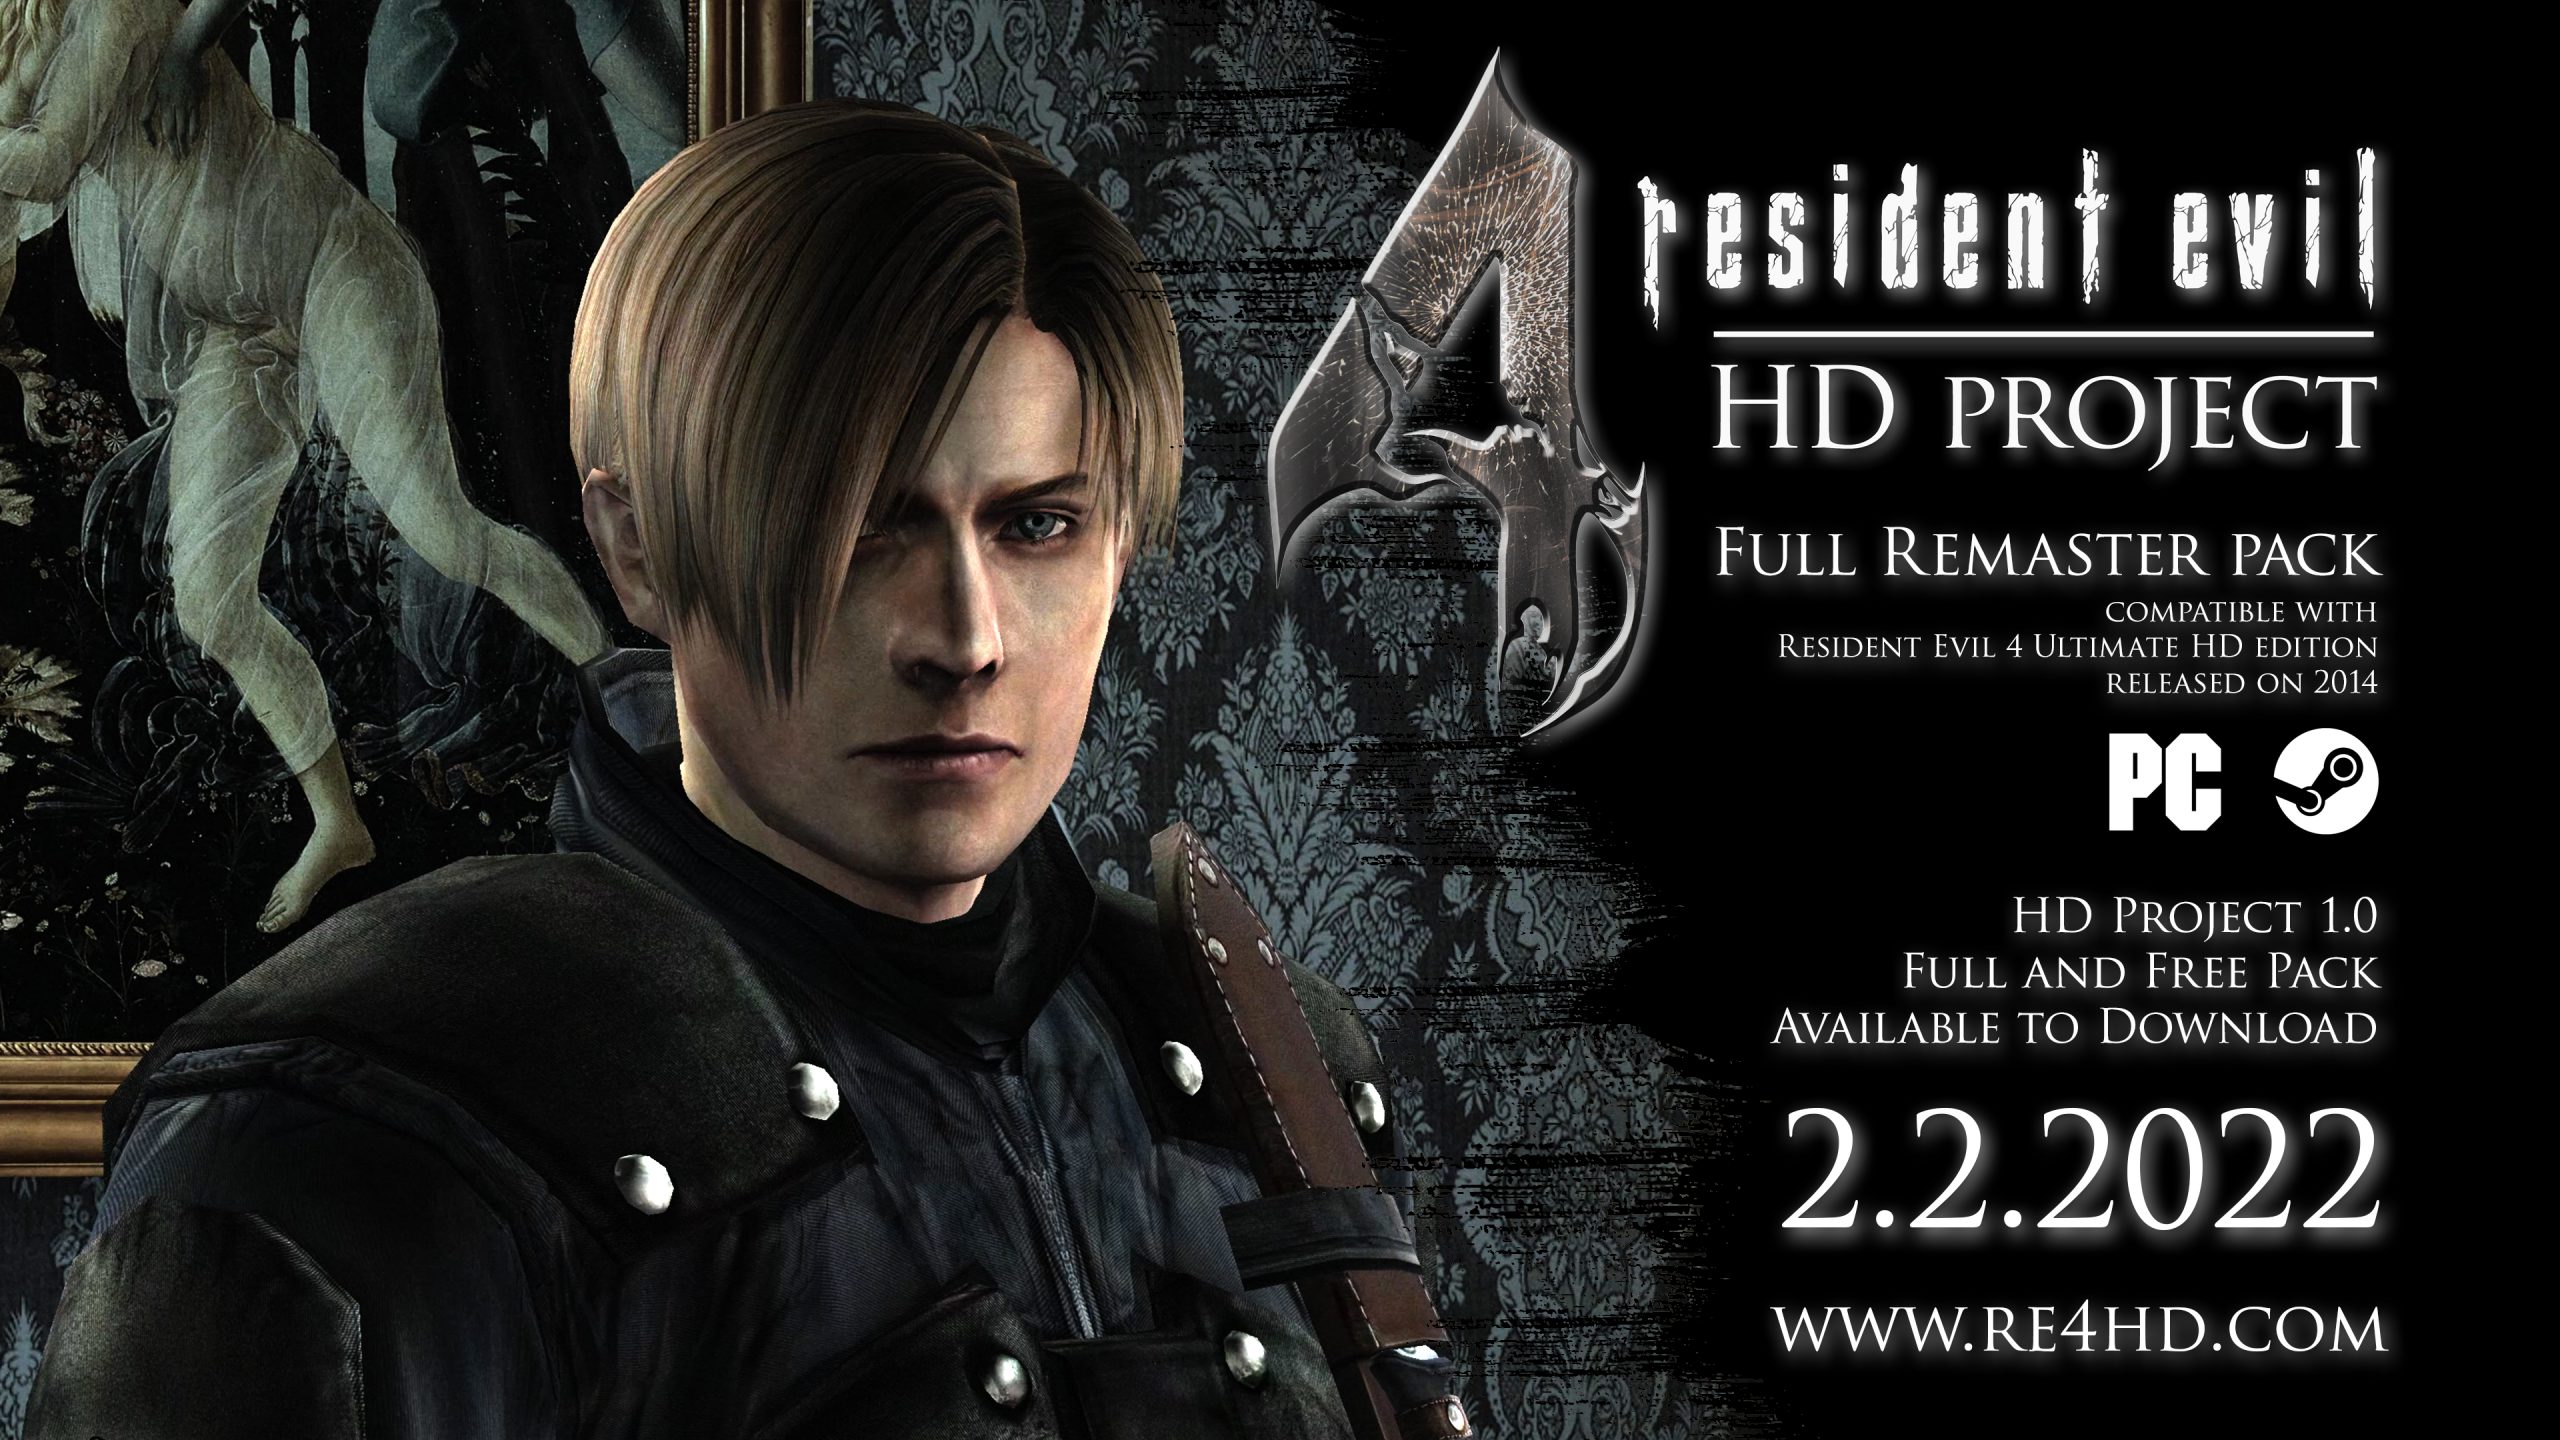 Recommending the Resident Evil 4 HD Project